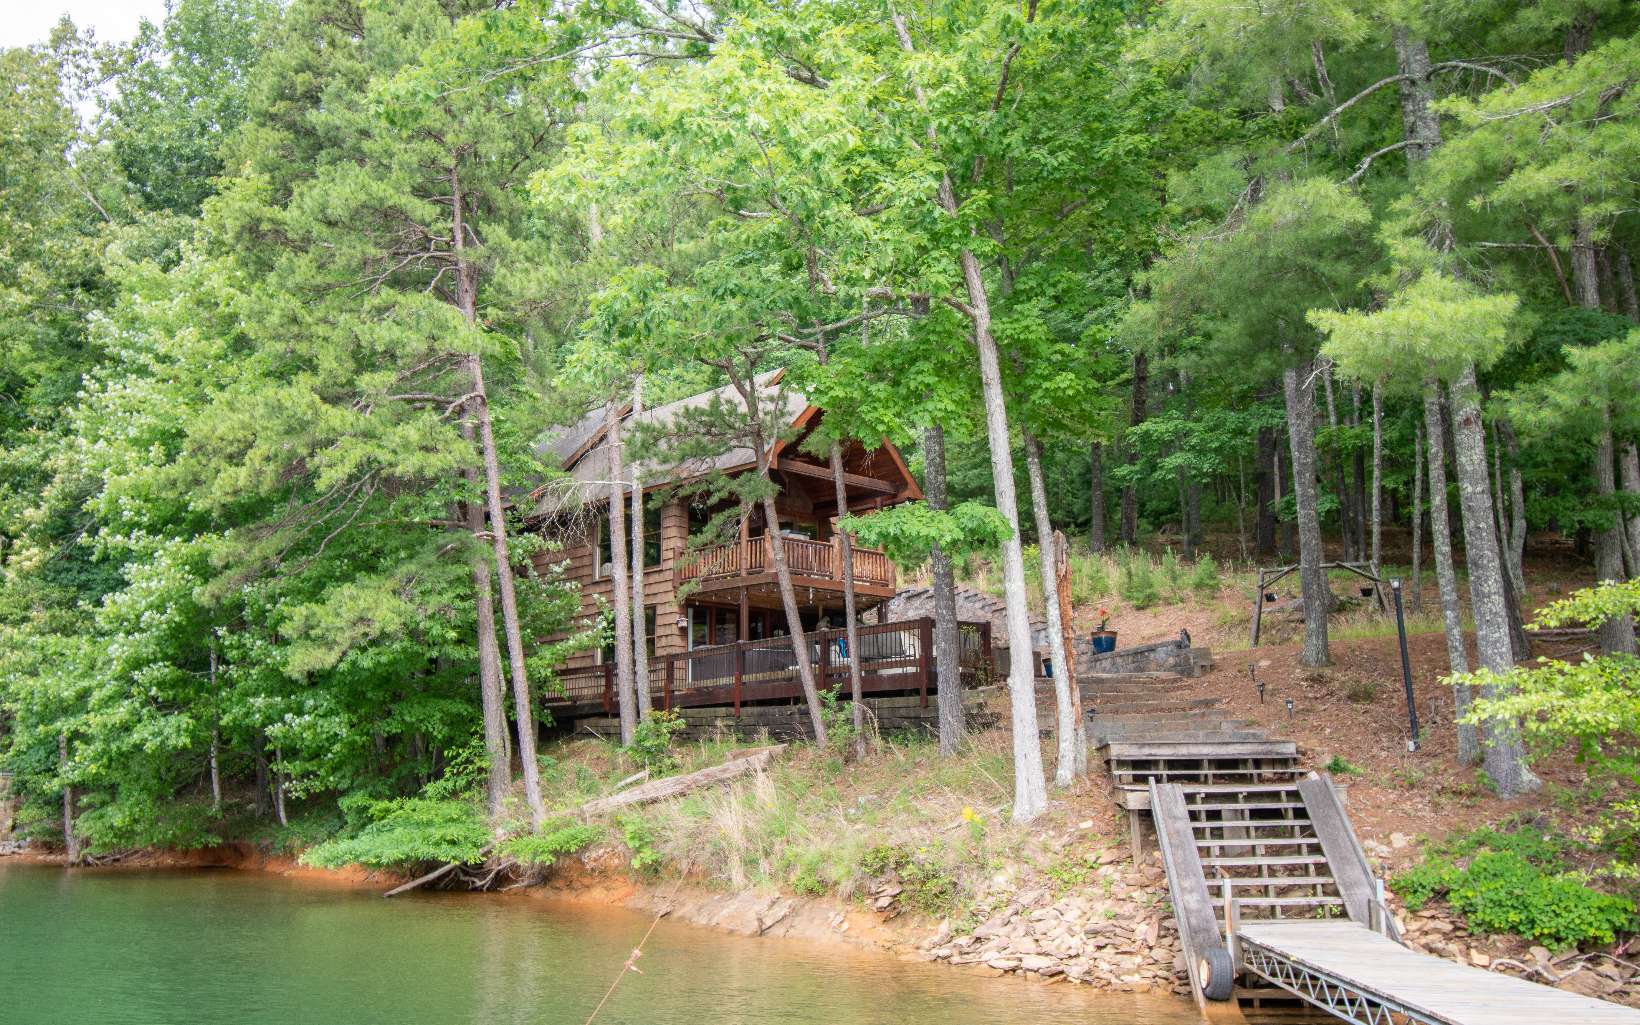 First Time on the Market!!! Come enjoy lake living at its finest. This cabin sits within a stones throw of Lake Blue Ridge. Located 1/2 mile from the entrance of Necowa Cove. Located near hiking and biking trails, Toccoa River, Blue Ridge Marina, and only 15 minutes from Downtown Blue Ridge. It's also located at the end of the road allowing privacy and no thru traffic. This property has everything you could wish for. Bring your clothes and toothbrush and relax on the lake. This cabin would make a great property for a full time residence, vacation home, or a short term rental. Owners currently rents this property on Airbnb.